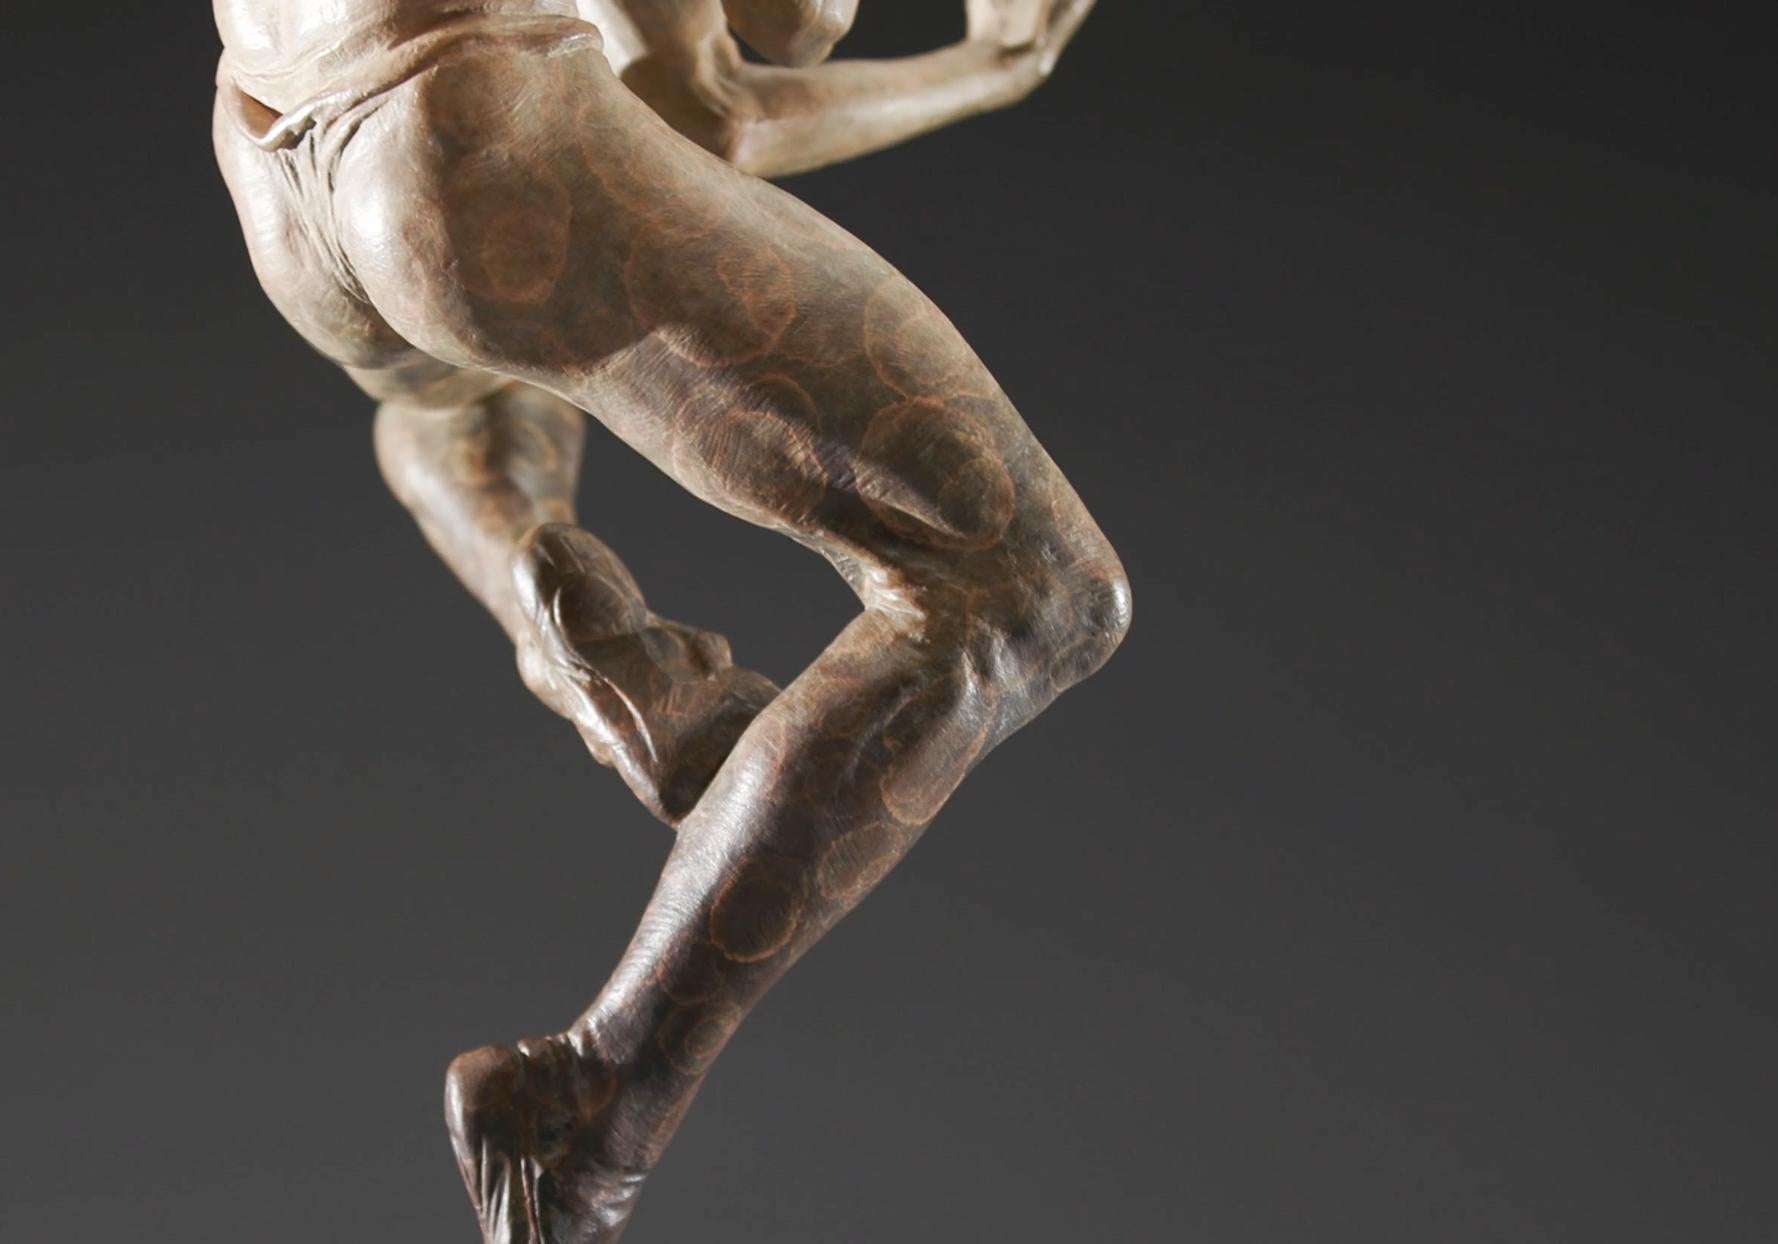 “A silent medium within a silent medium.” These are the words contemporary master Richard MacDonald uses in describing his world renowned Mime Series. MacDonald’s trademark skill at investing his evocative bronze images with movement and life is